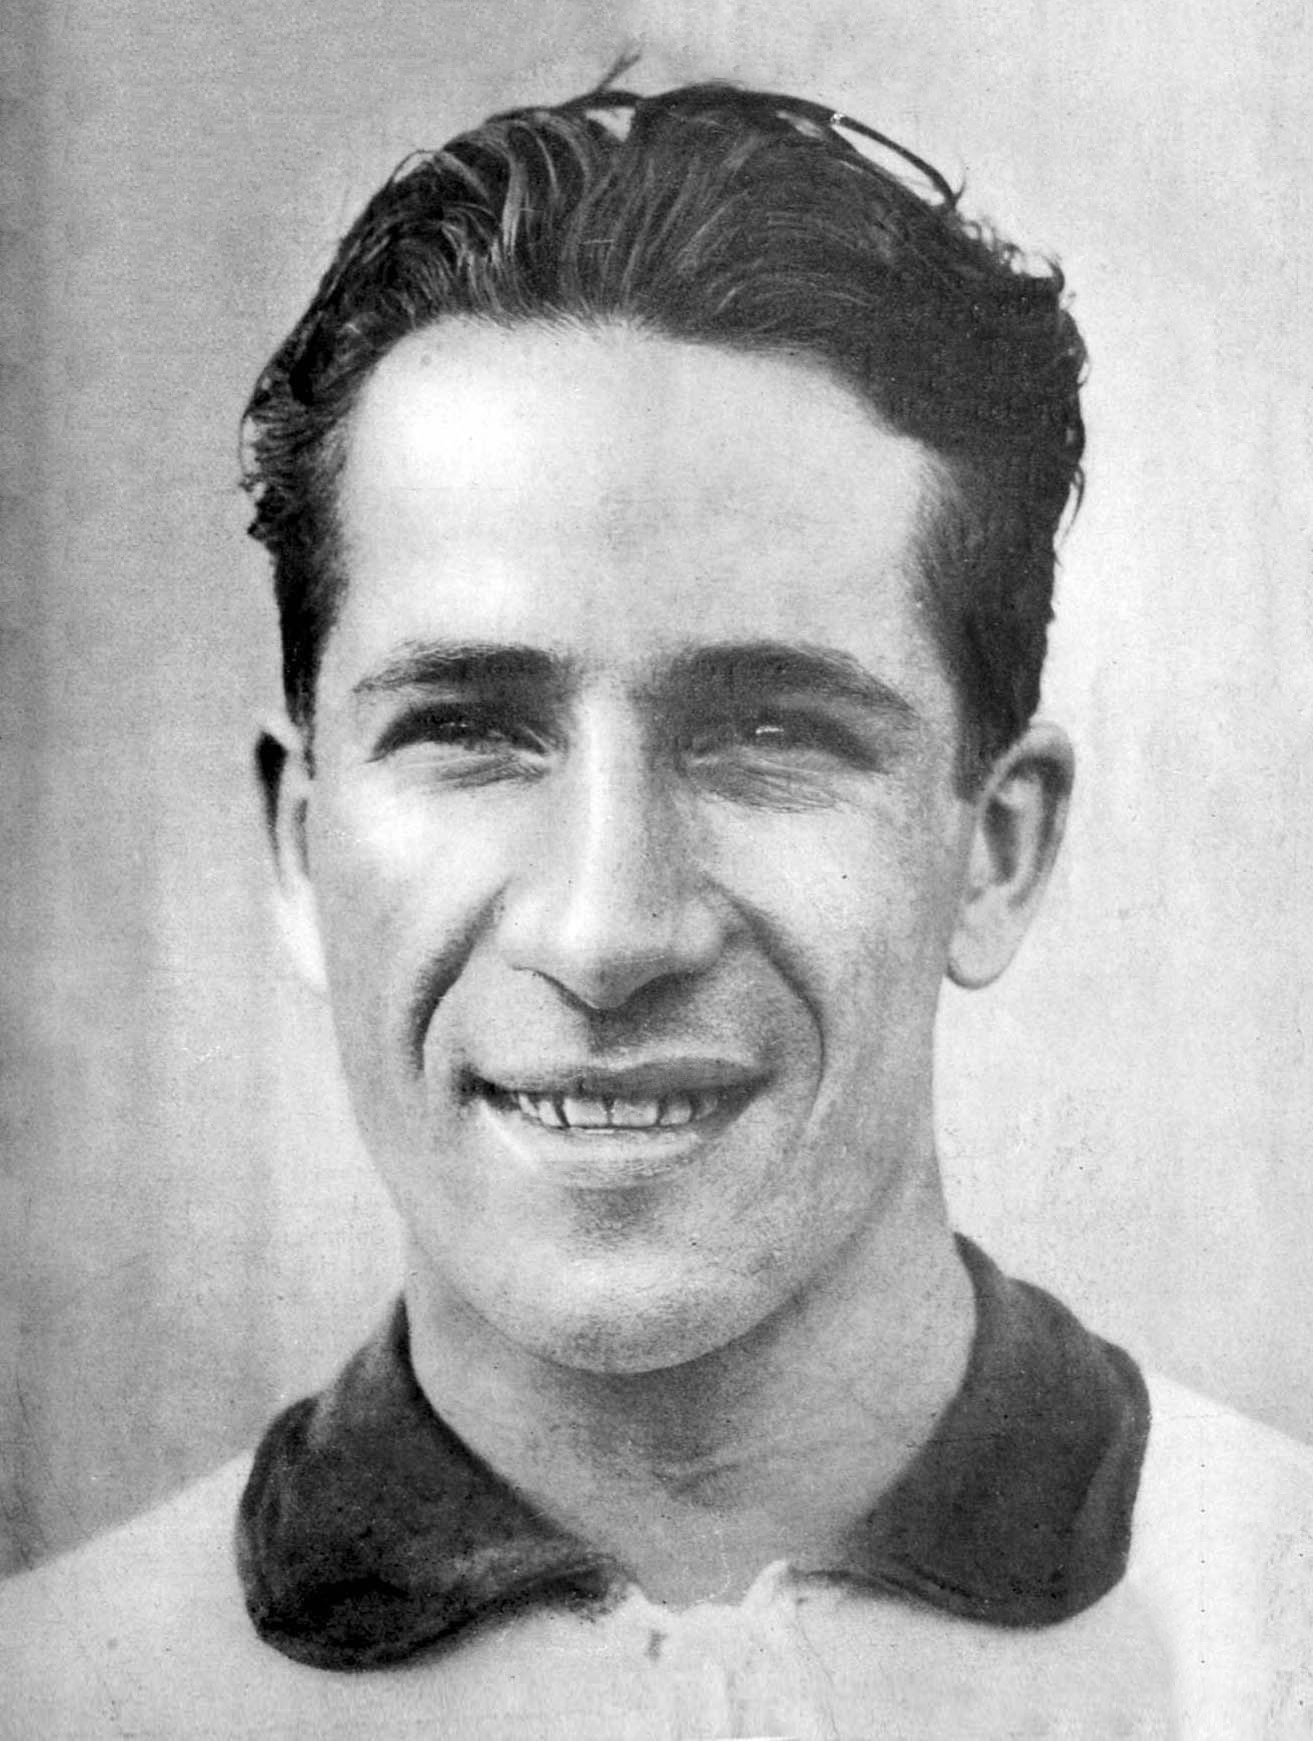 Guillermo Stábile, Argentinian footballer and manager (d. 1966) was born on January 17, 1905.